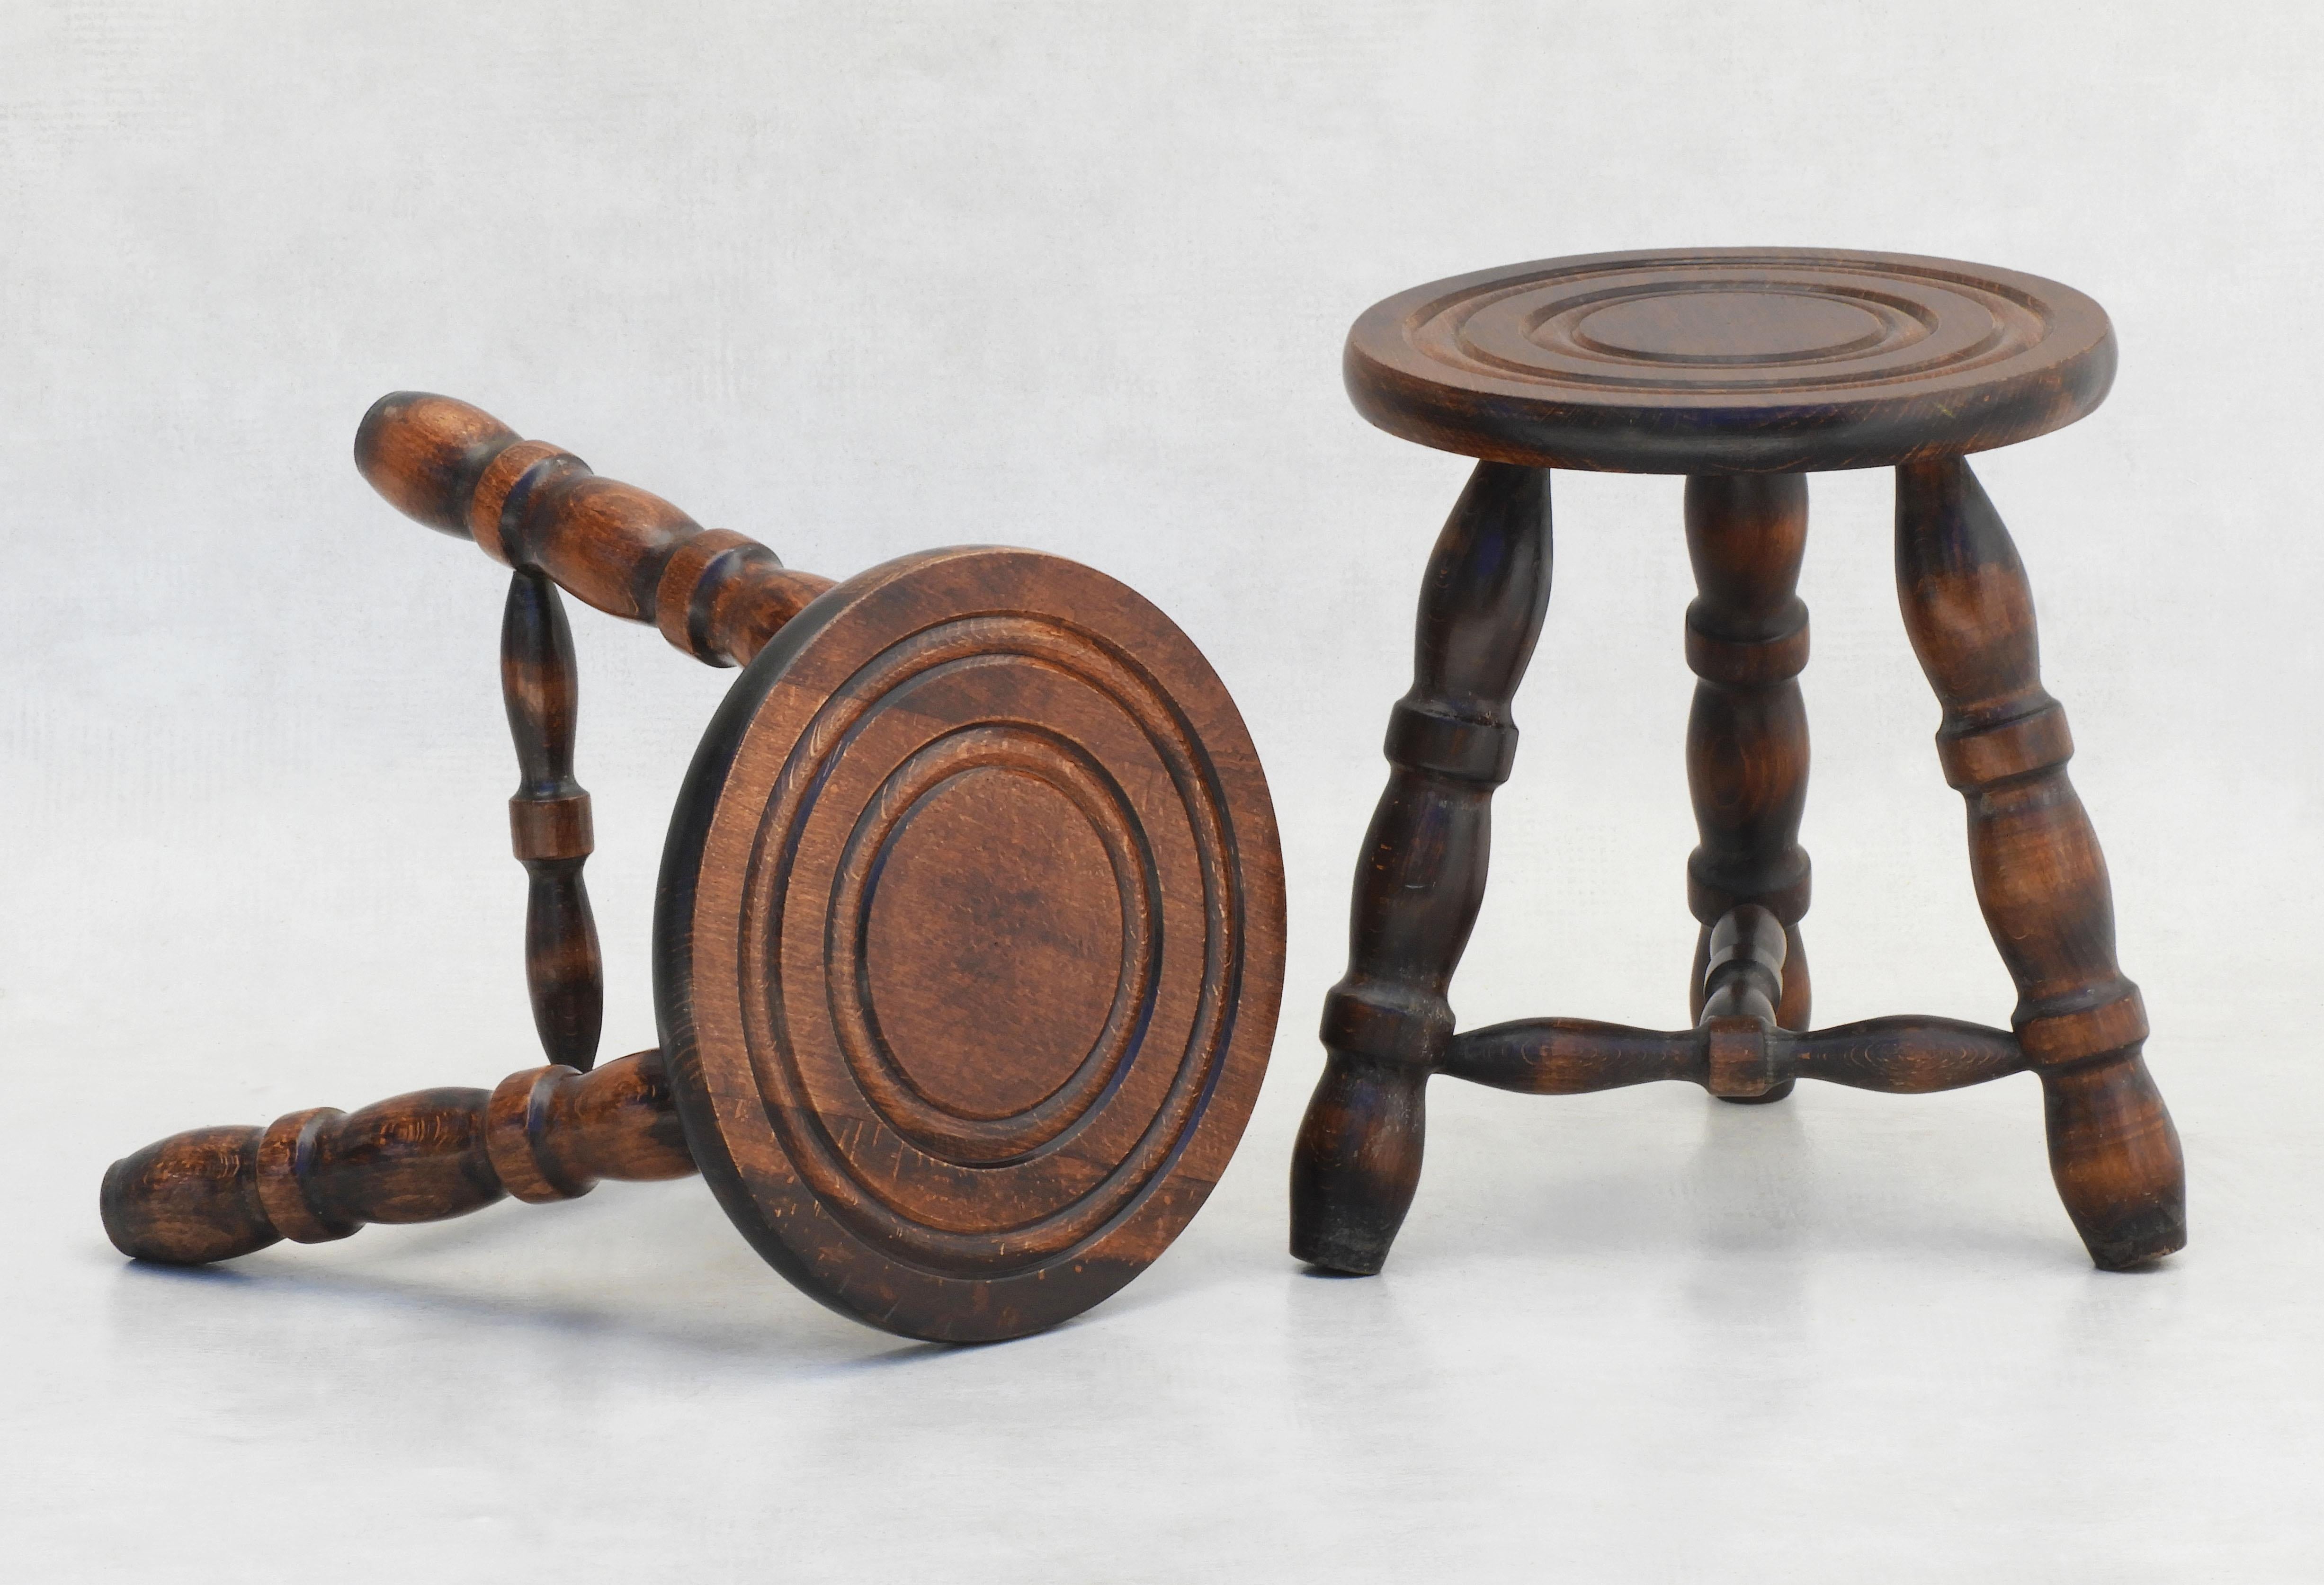 Pair of French tripod stools c1950

A good pair of wooden Basque-style wood tripod stools from midcentury France. Versatile handcrafted three-legged tabouret stools, which can also be placed as nightstands or side tables in almost any room.